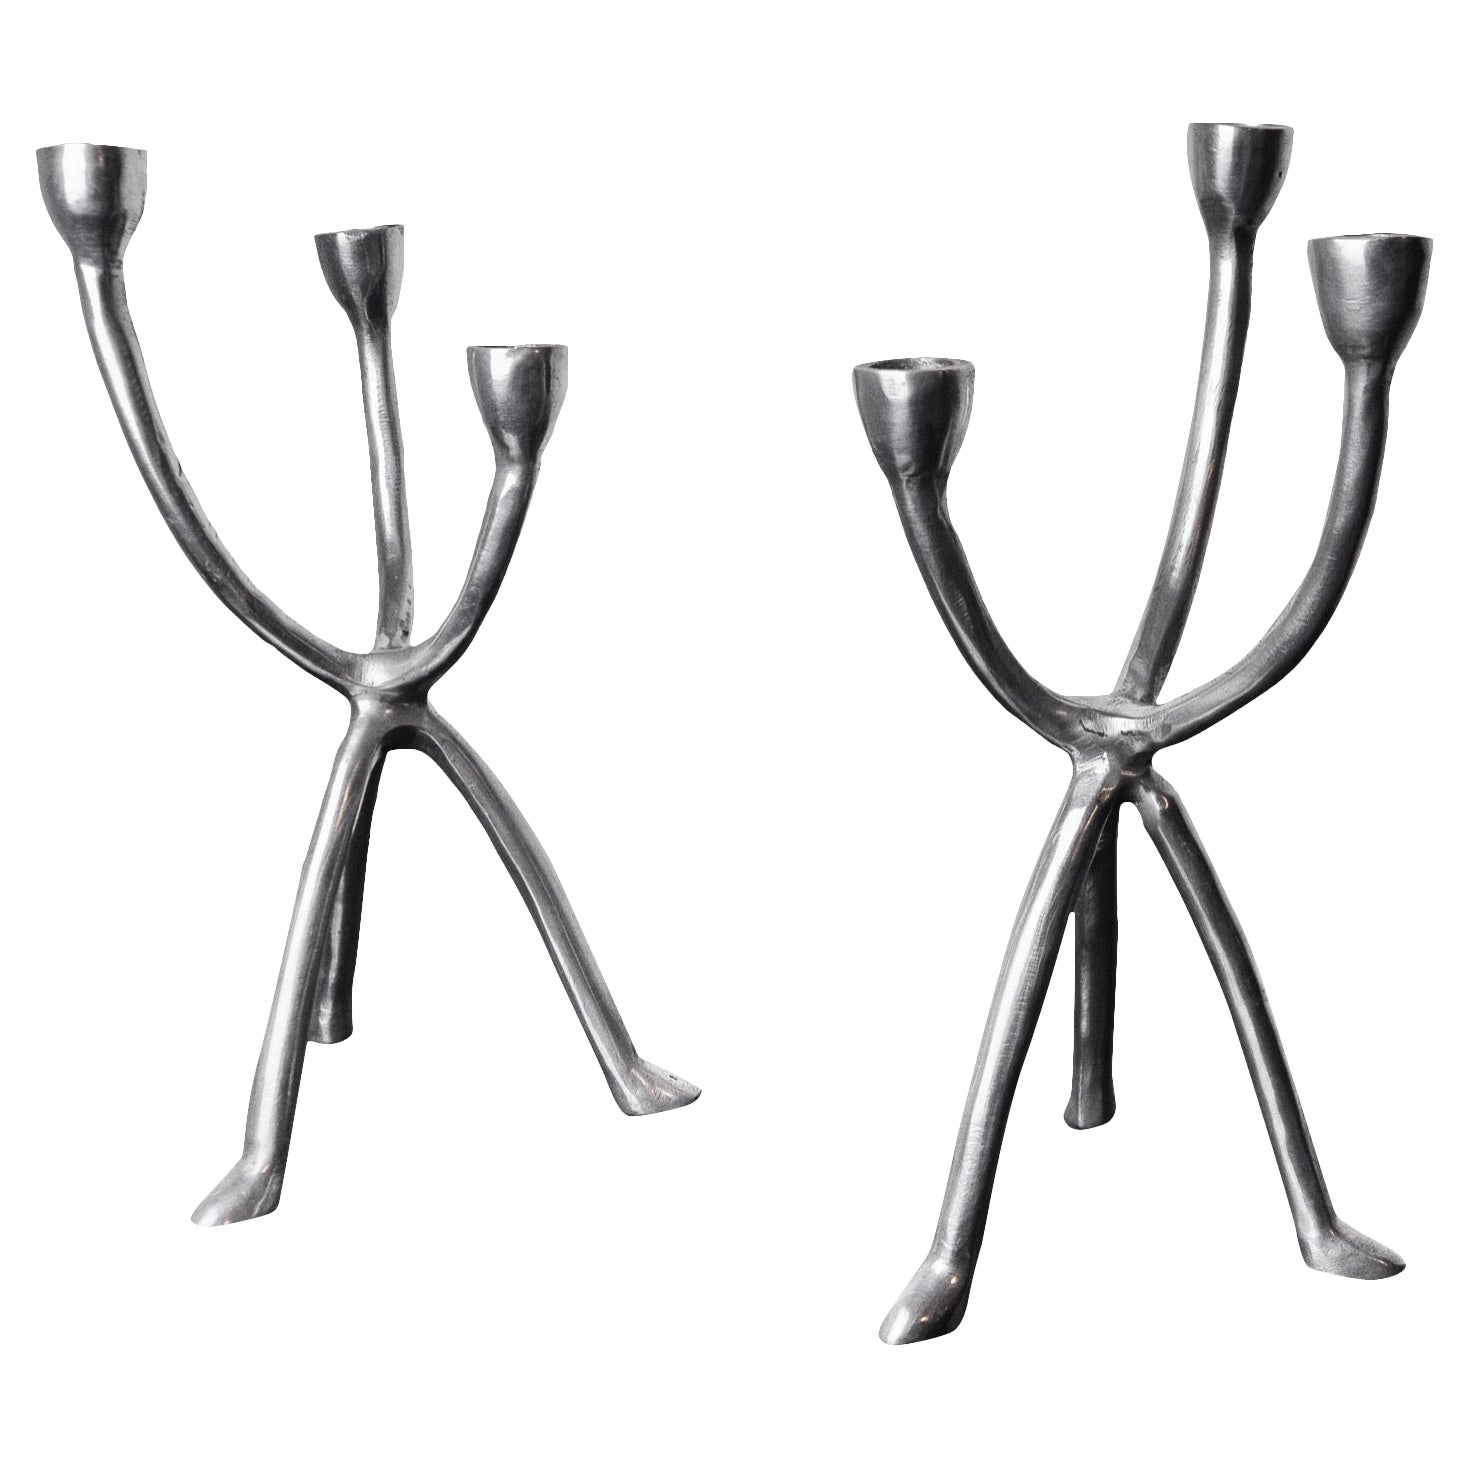 Pair of Brutalist Candlesticks 3 Arms, Denmark, 1970 For Sale